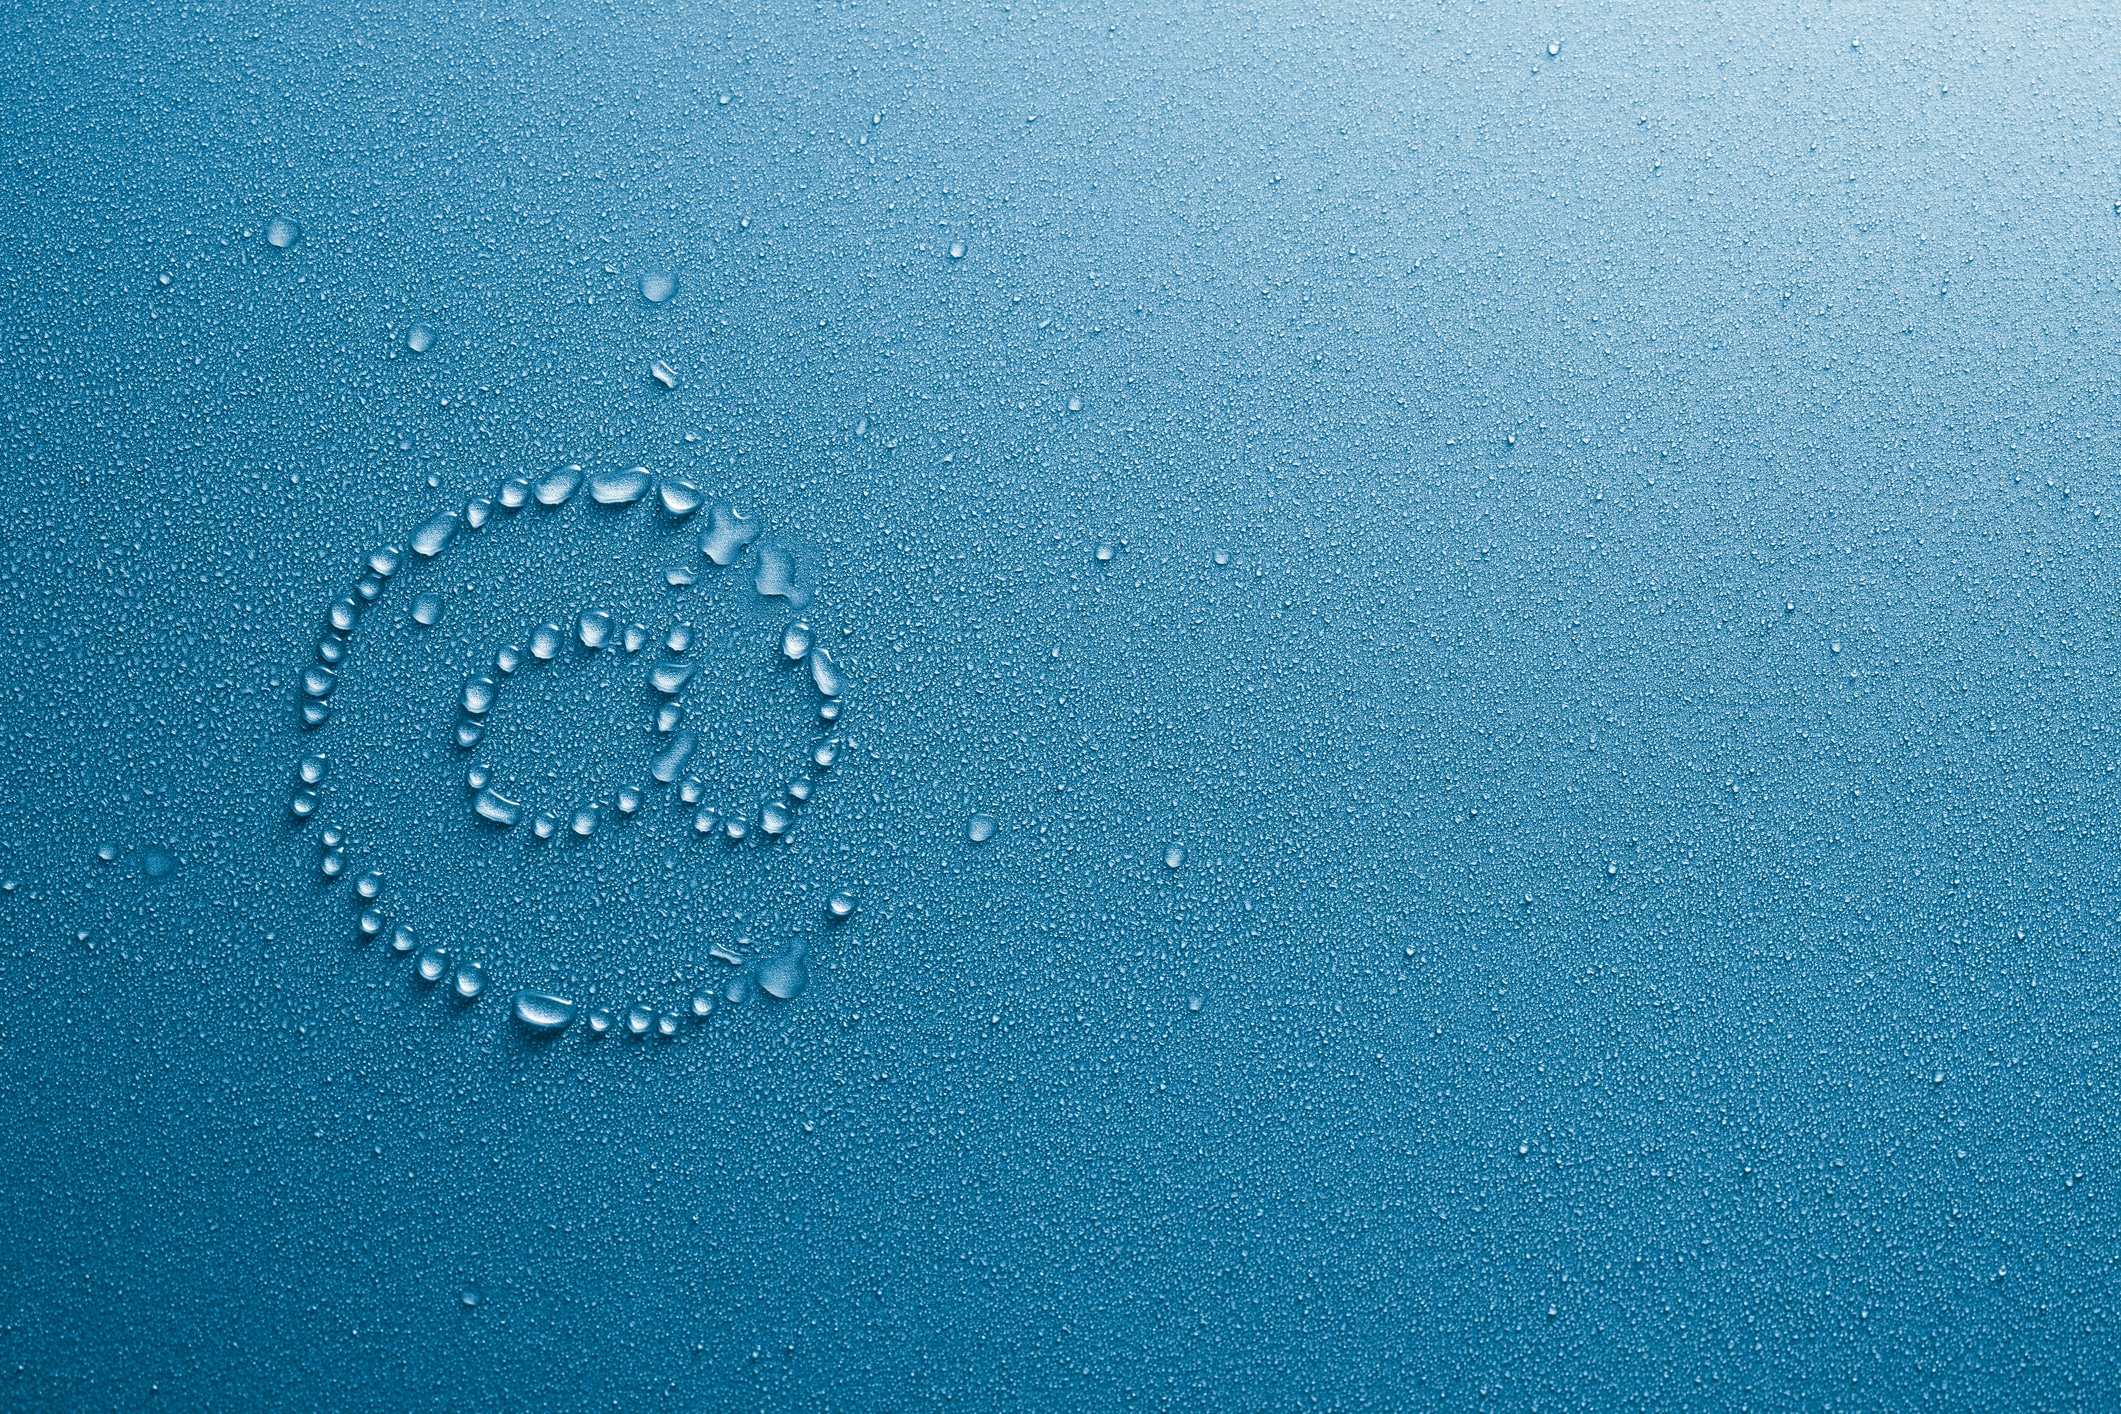 @ symbol in water droplets